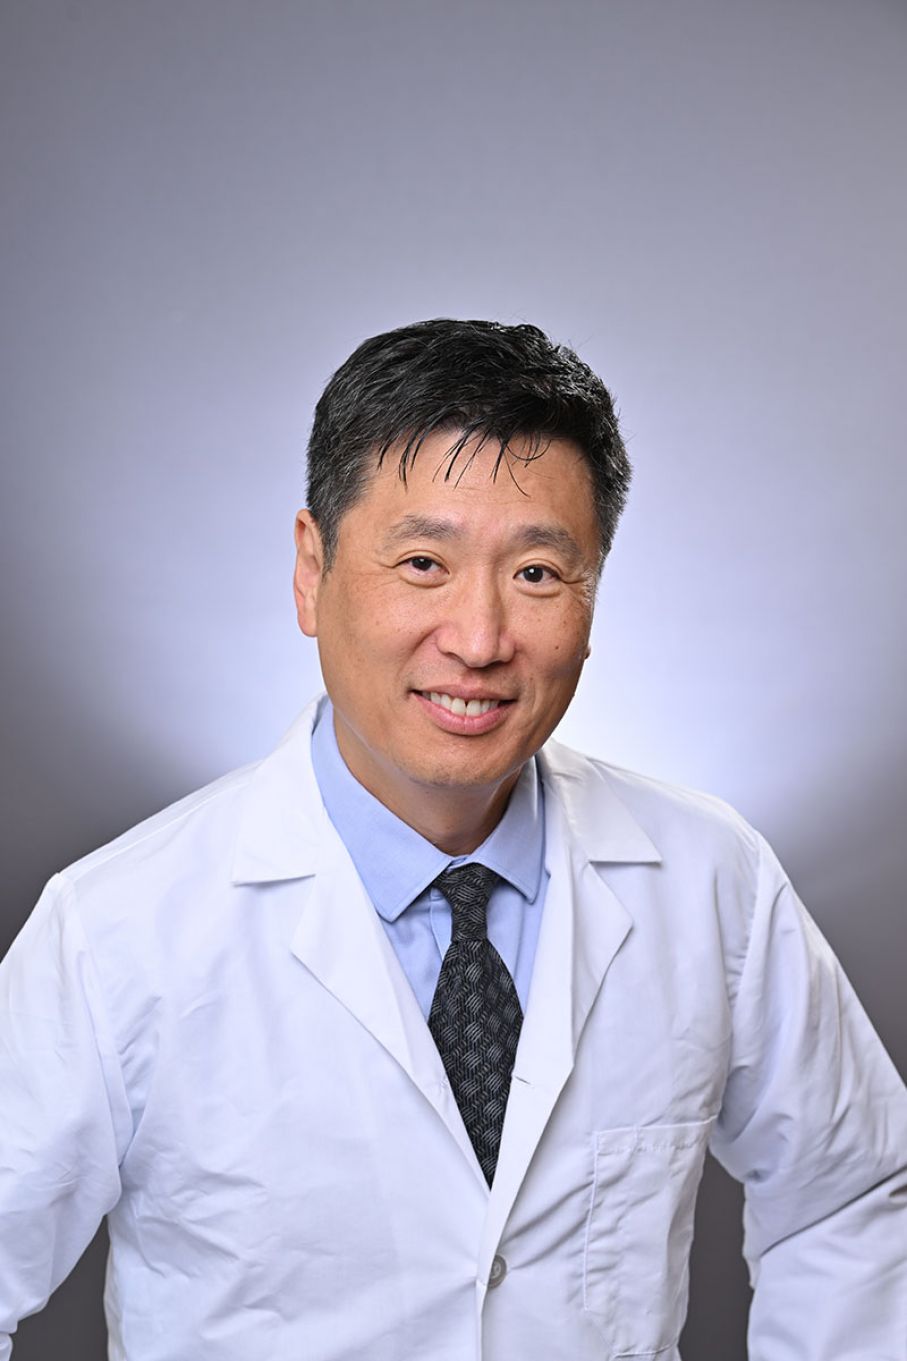 St. Joseph’s Health Appoints Eric T. Choi, MD, FACS  Vice Chairman of the Department of Surgery  Division of Vascular Surgery